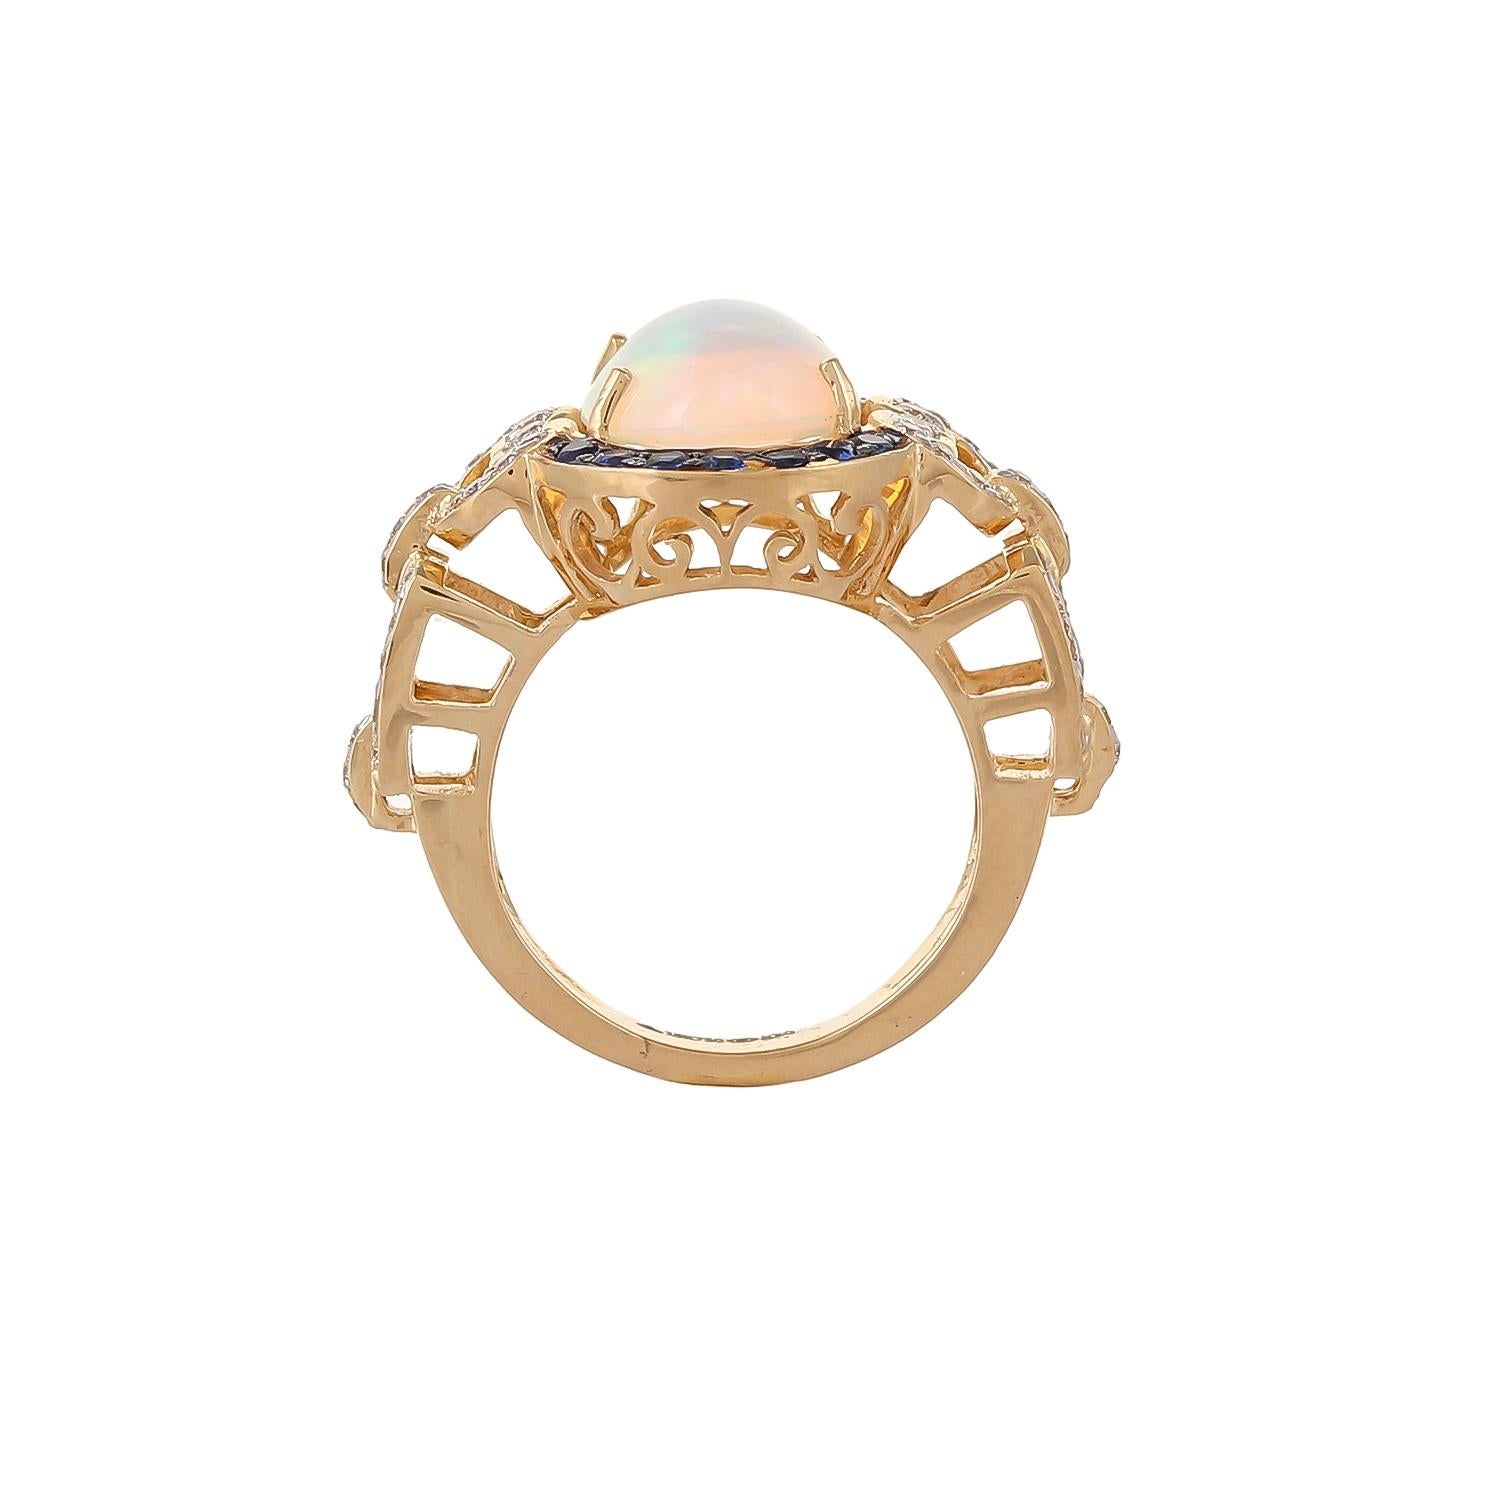 A 3.20ct Ethiopian opal cabochon, when combined with 0.36ct diamond- cut blue sapphire prove a rich beautiful combination. This statement ring is handcrafted in 18kt gold and 0.35ct diamonds is a good example of great craftsmanship and makes an